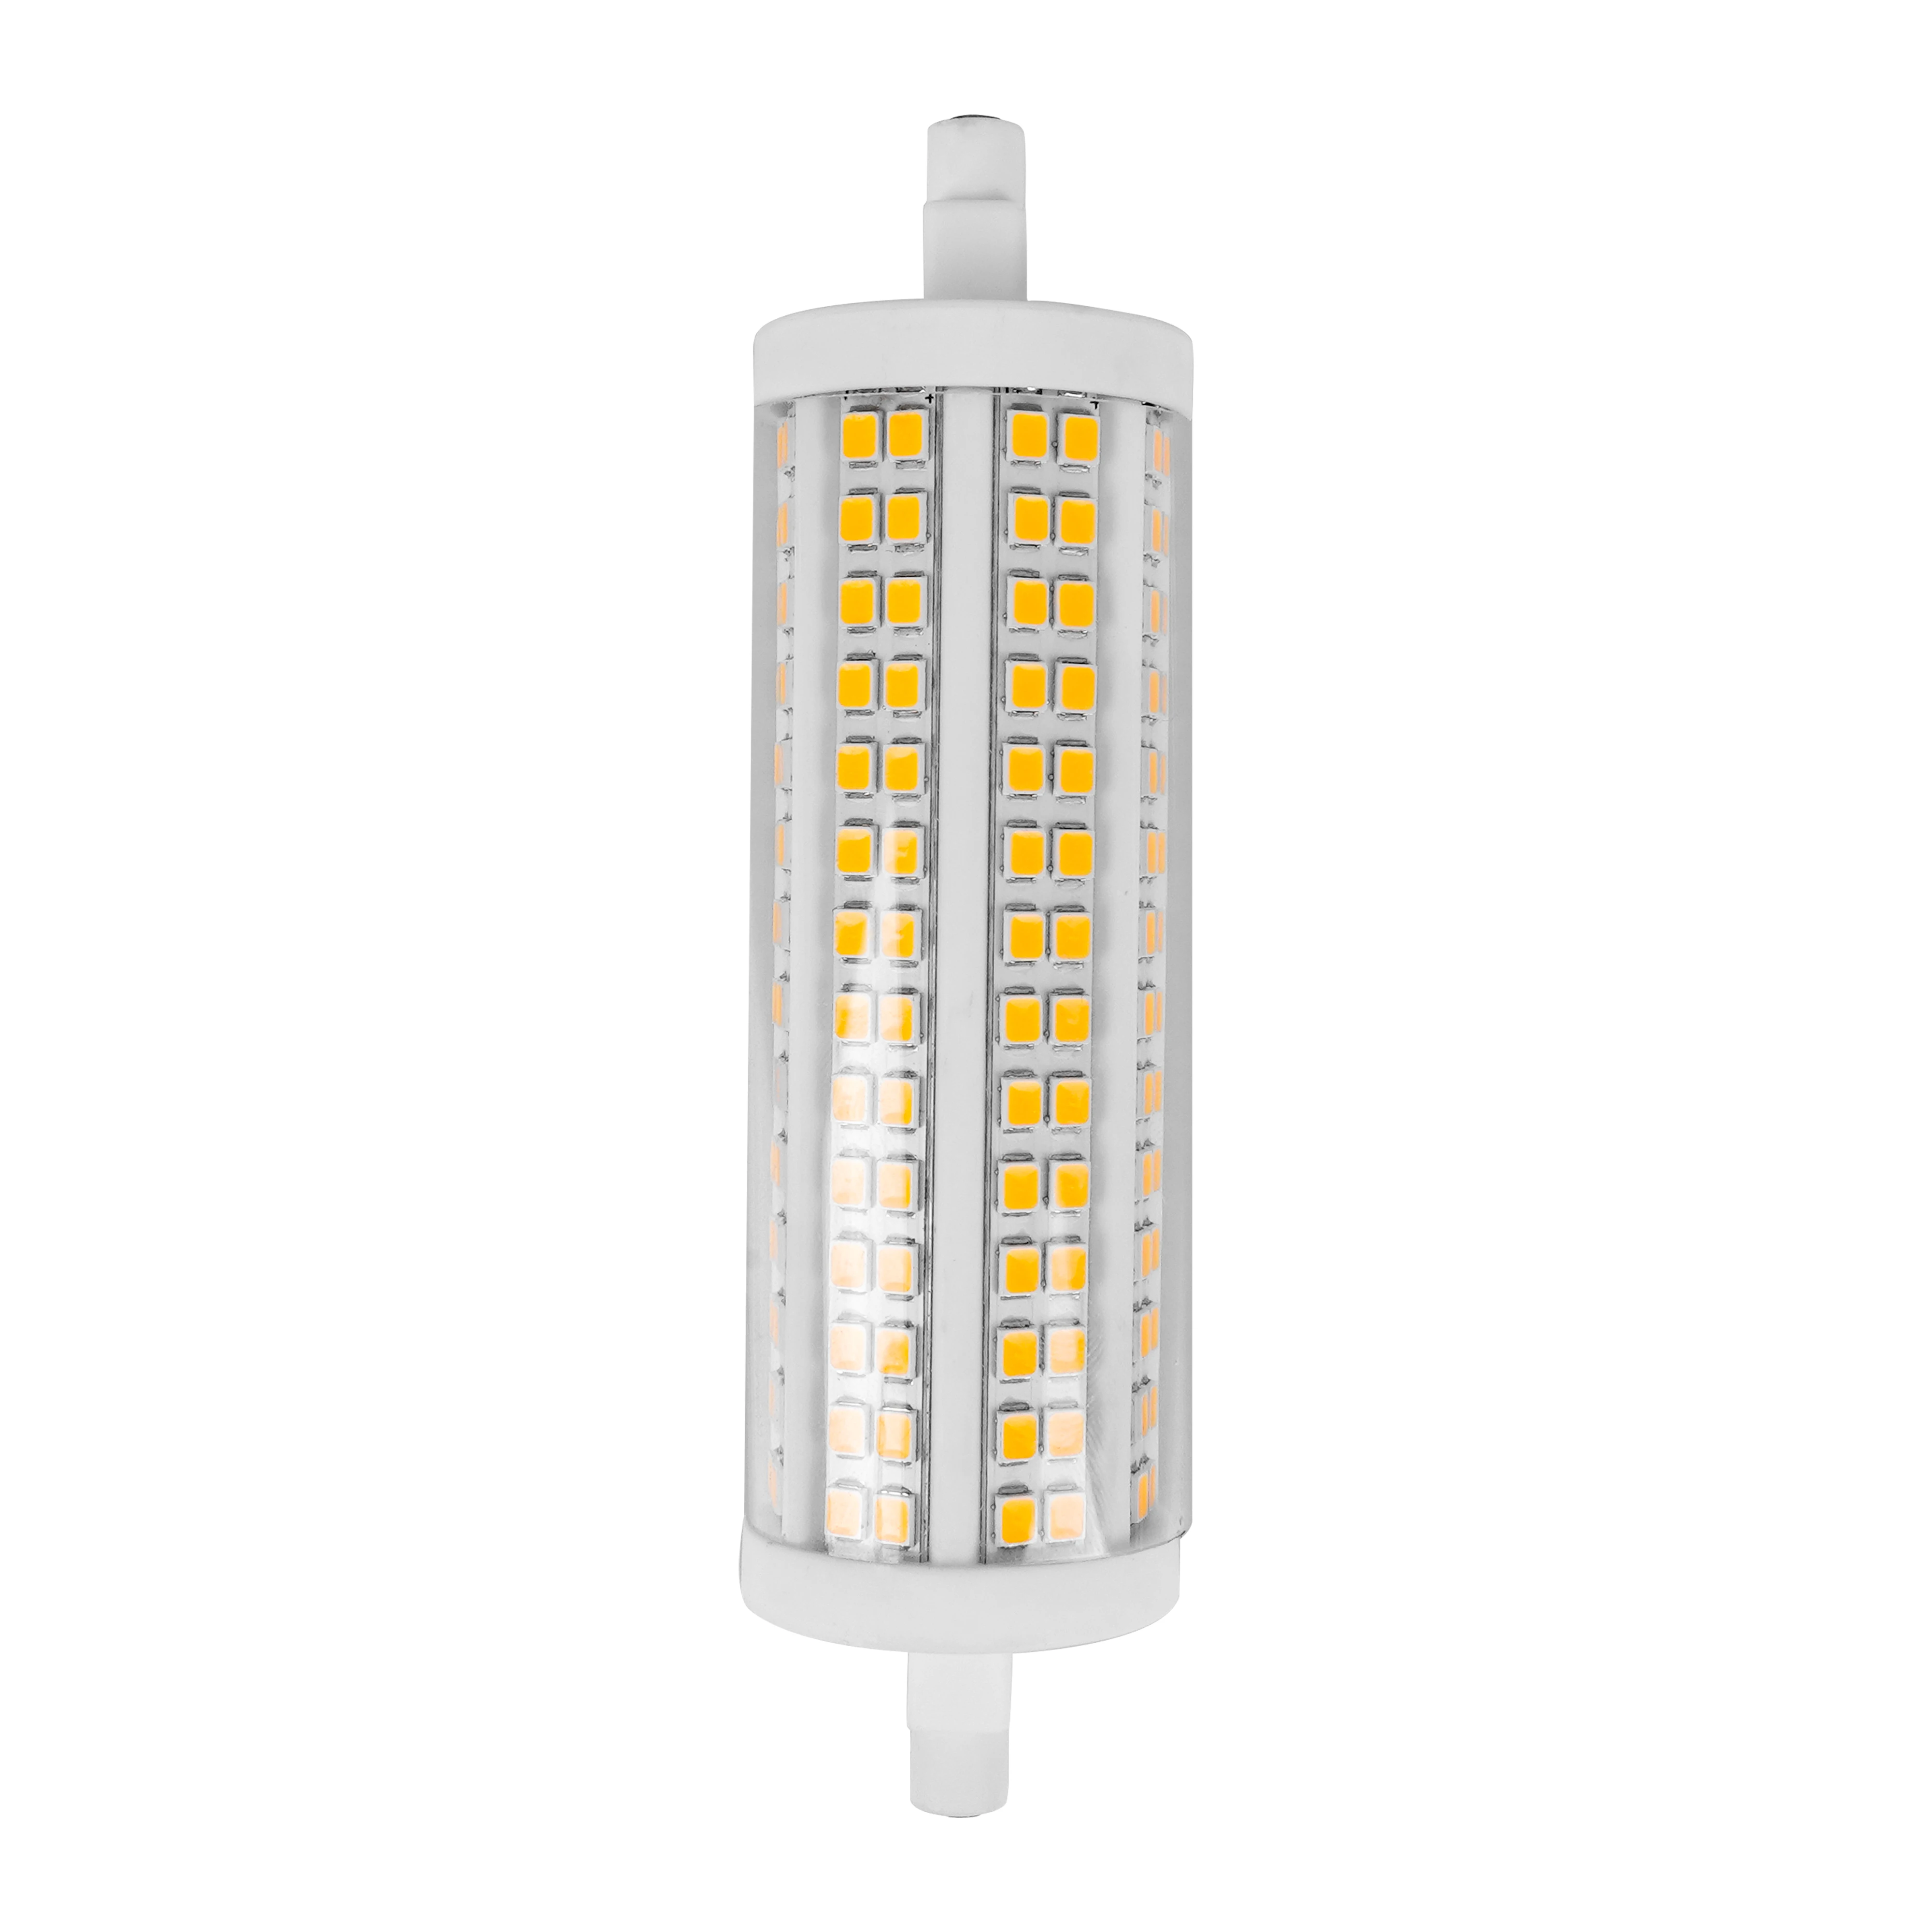 Acquiesce Voorman ruw 300 Degree Smd 2835 R7s Led 118mm 20w Ac85-265v R7s Led J118 Light - Buy  5000 Lumen Led Projector 30w 118mm R7s Led,30w R7s Led Lamp,Lampada 30w Led  R7s Product on Alibaba.com